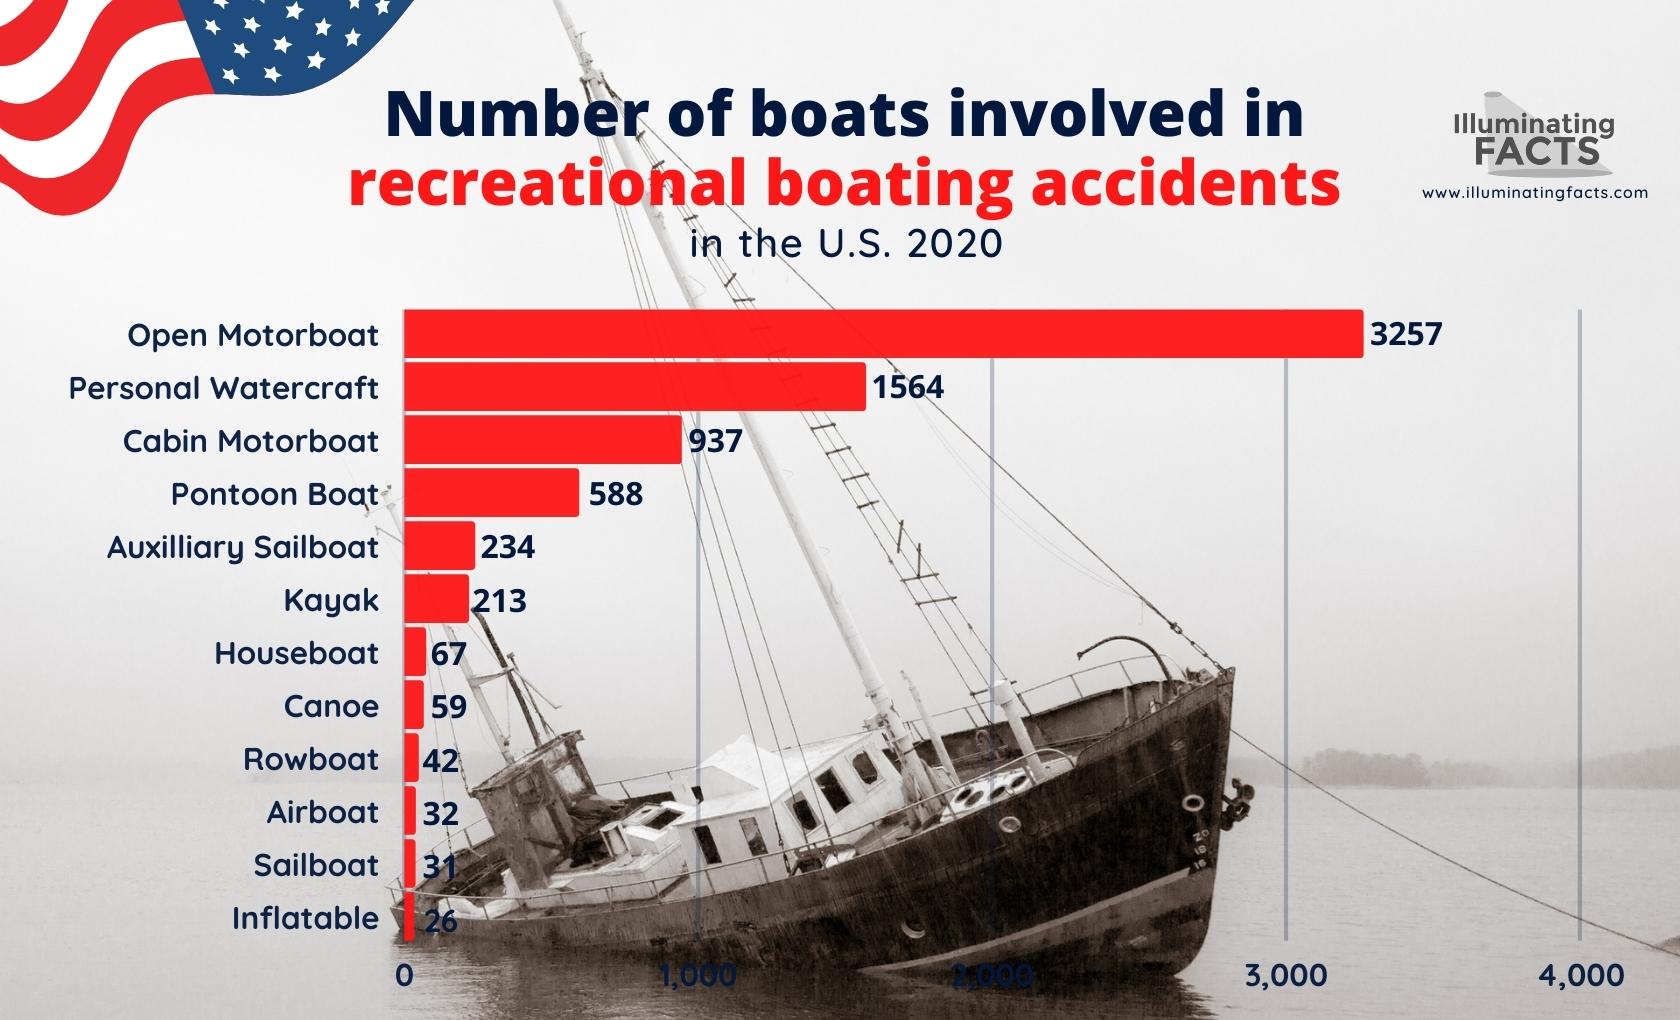 Number of boats involved in recreational boating accidents